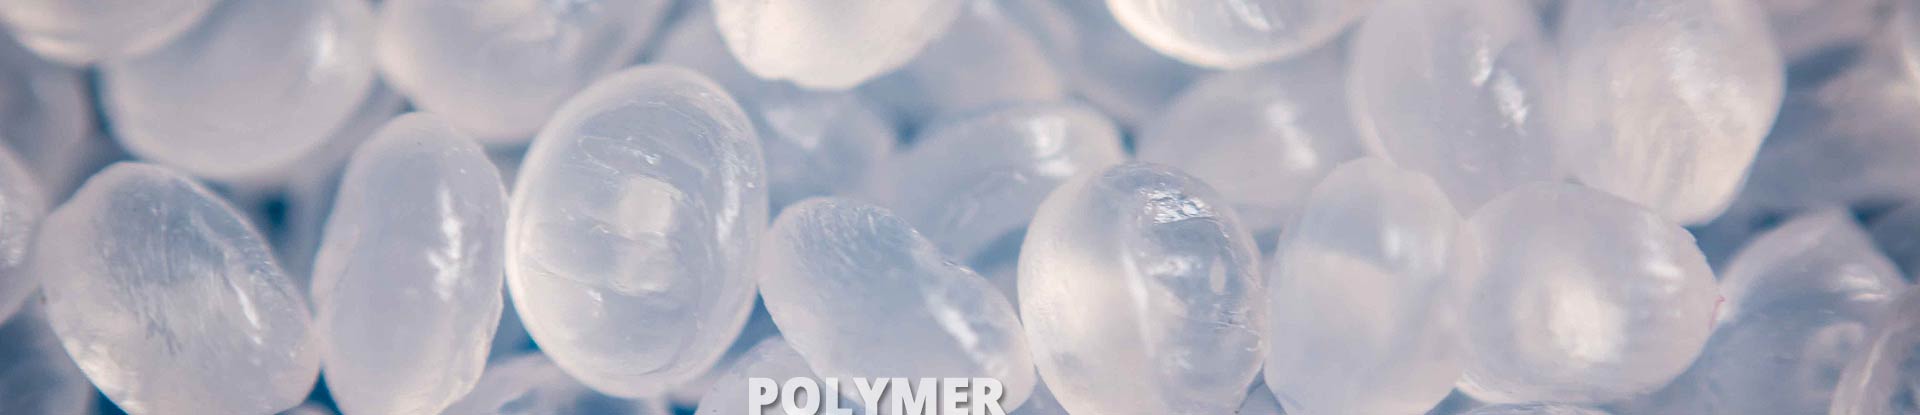 Polymer | Captain Polymer | IOCL Polymer | PPHP | PPCP | HDPE | LLDPE | Captain Polyplast Ltd.